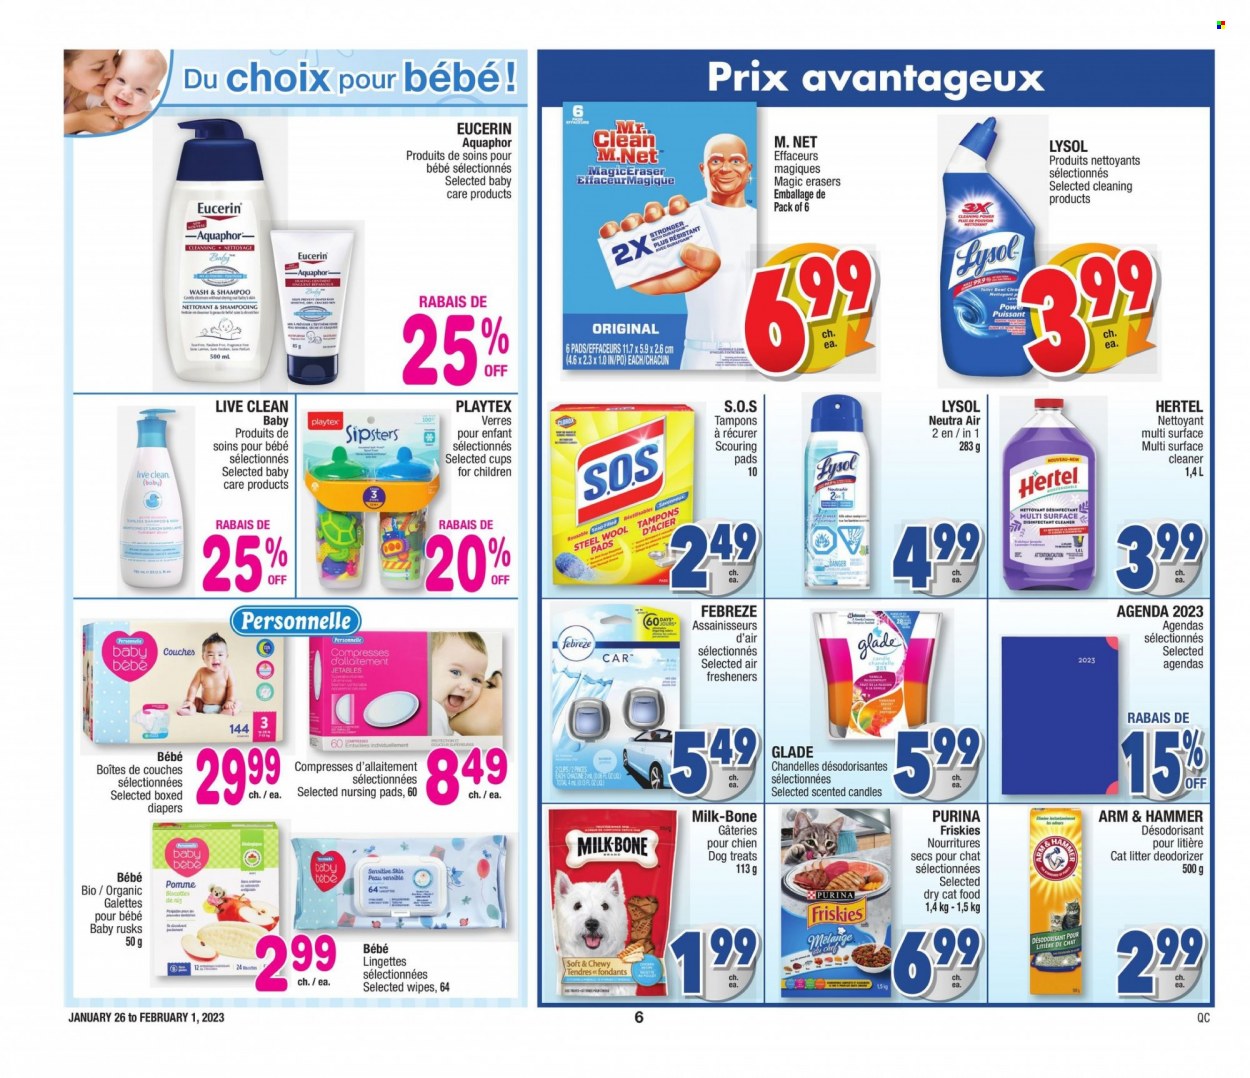 thumbnail - Jean Coutu Flyer - January 26, 2023 - February 01, 2023 - Sales products - ARM & HAMMER, wipes, nappies, Aquaphor, Febreze, surface cleaner, cleaner, Lysol, Clorox, soap, Playtex, tampons, Sure, candle, air freshener, Glade, Eucerin, shampoo, desinfection. Page 6.